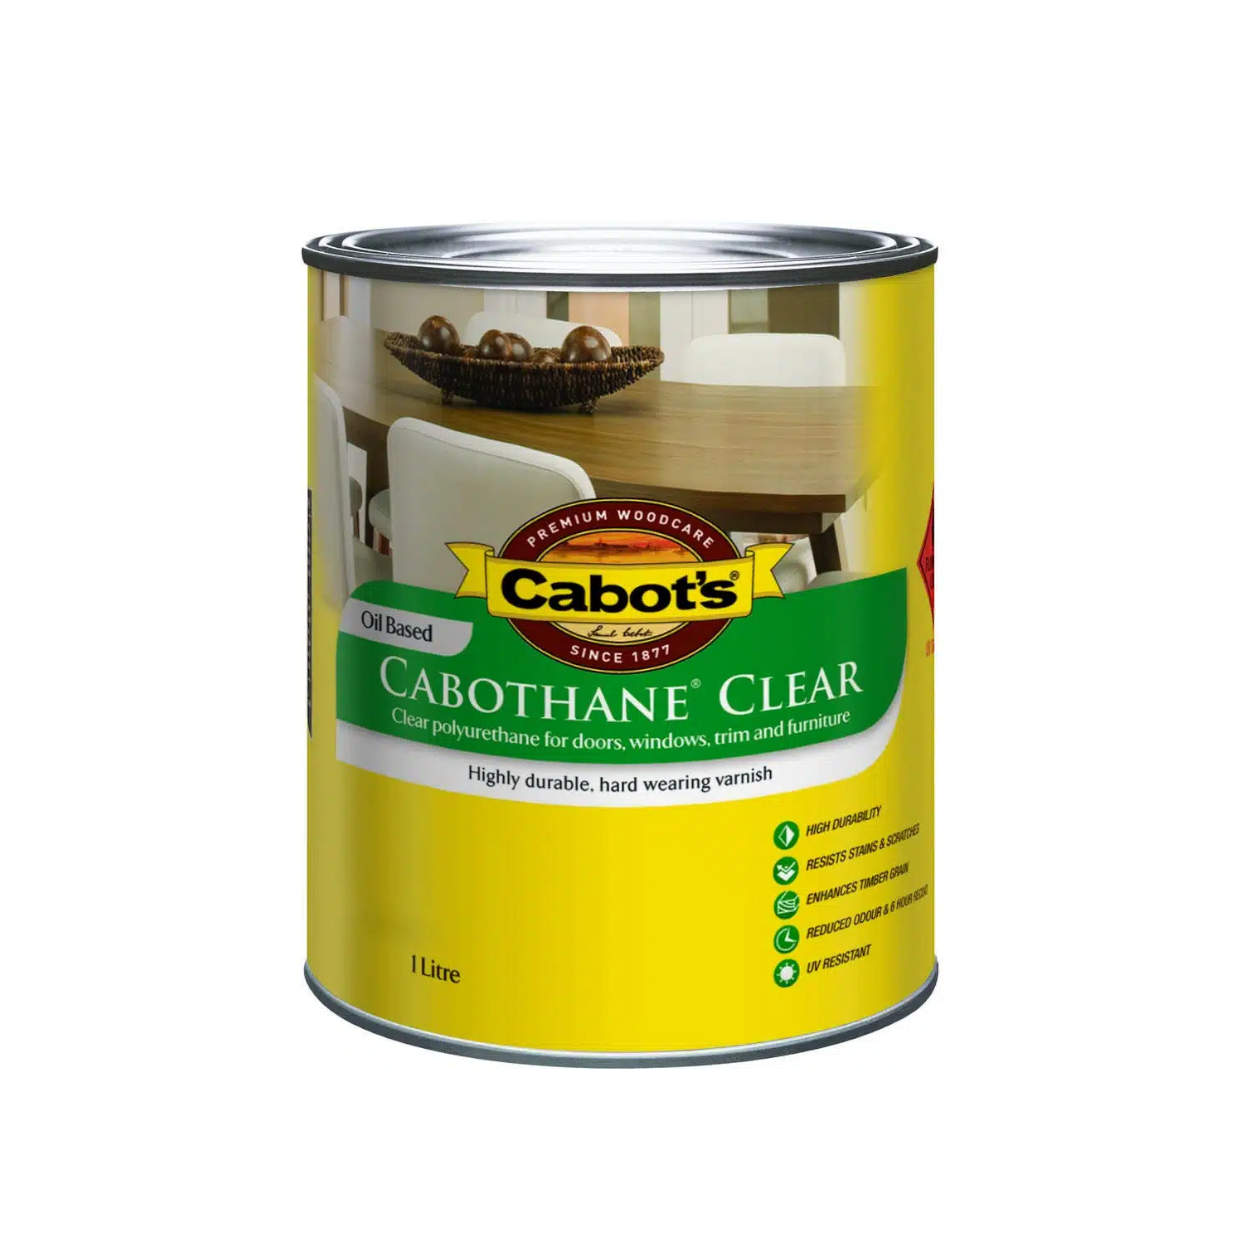 CABOTS_Cabothane_Clear_Oil_Based_1_litre